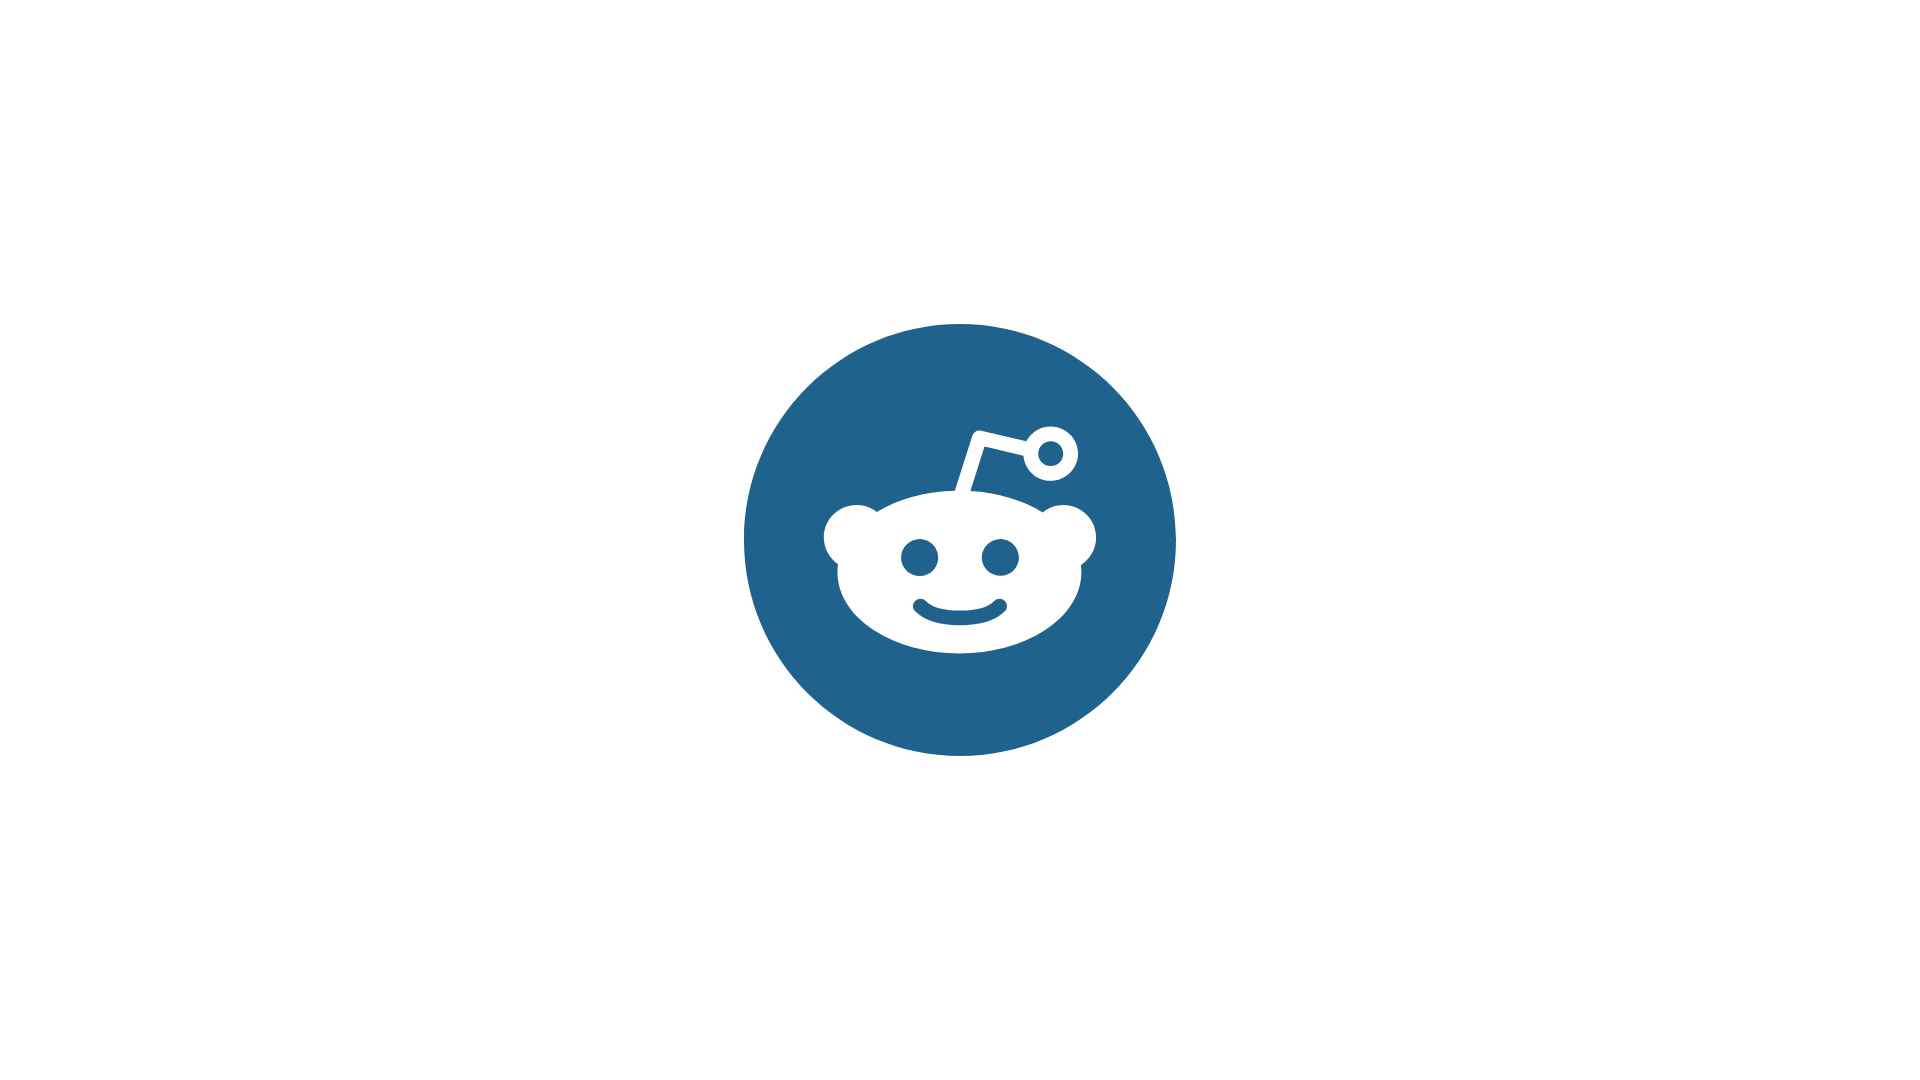 Can users share personal anecdotes, stories, or experiences on Reddit?